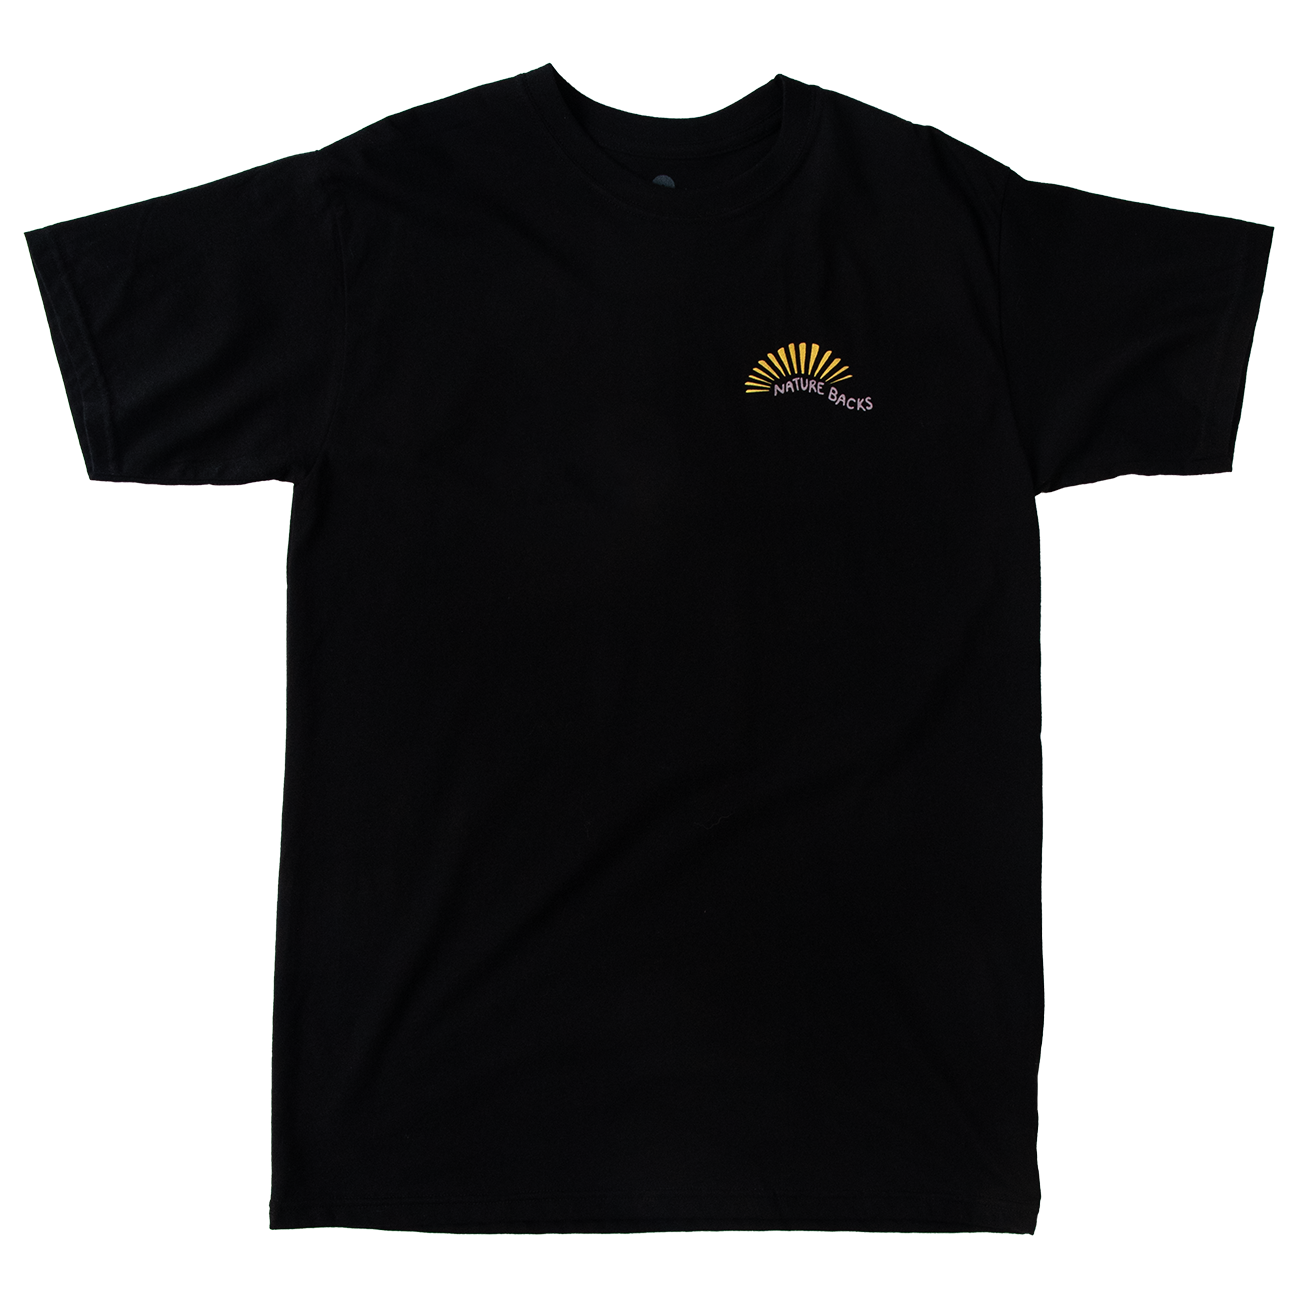 Nature Backs Limited Edition Short Sleeve 100% Organic Cotton T-Shirt | Limited Awaken Black Short Sleeve made with Eco-Friendly Fibers Sustainably made in the USA 